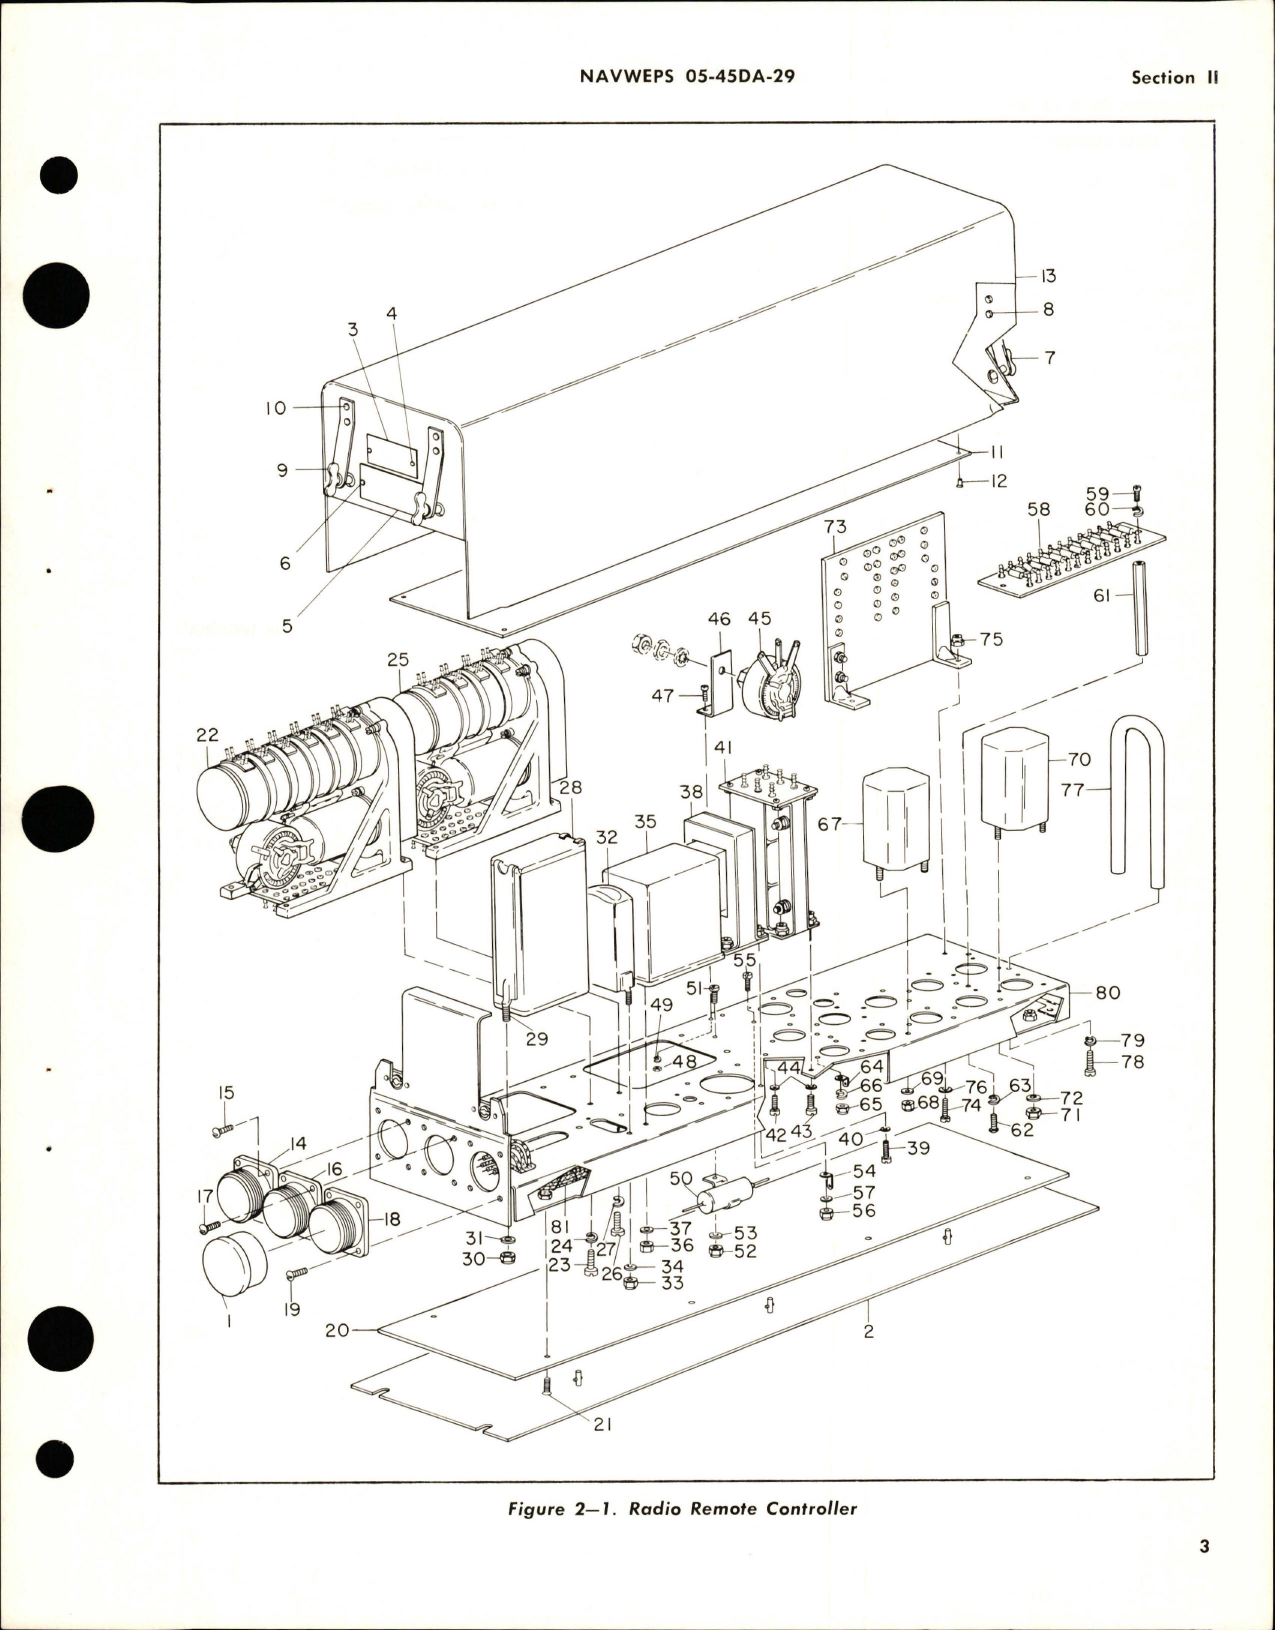 Sample page 7 from AirCorps Library document: Overhaul Instructions for Radio Remote Controller - Part 15740-1-A